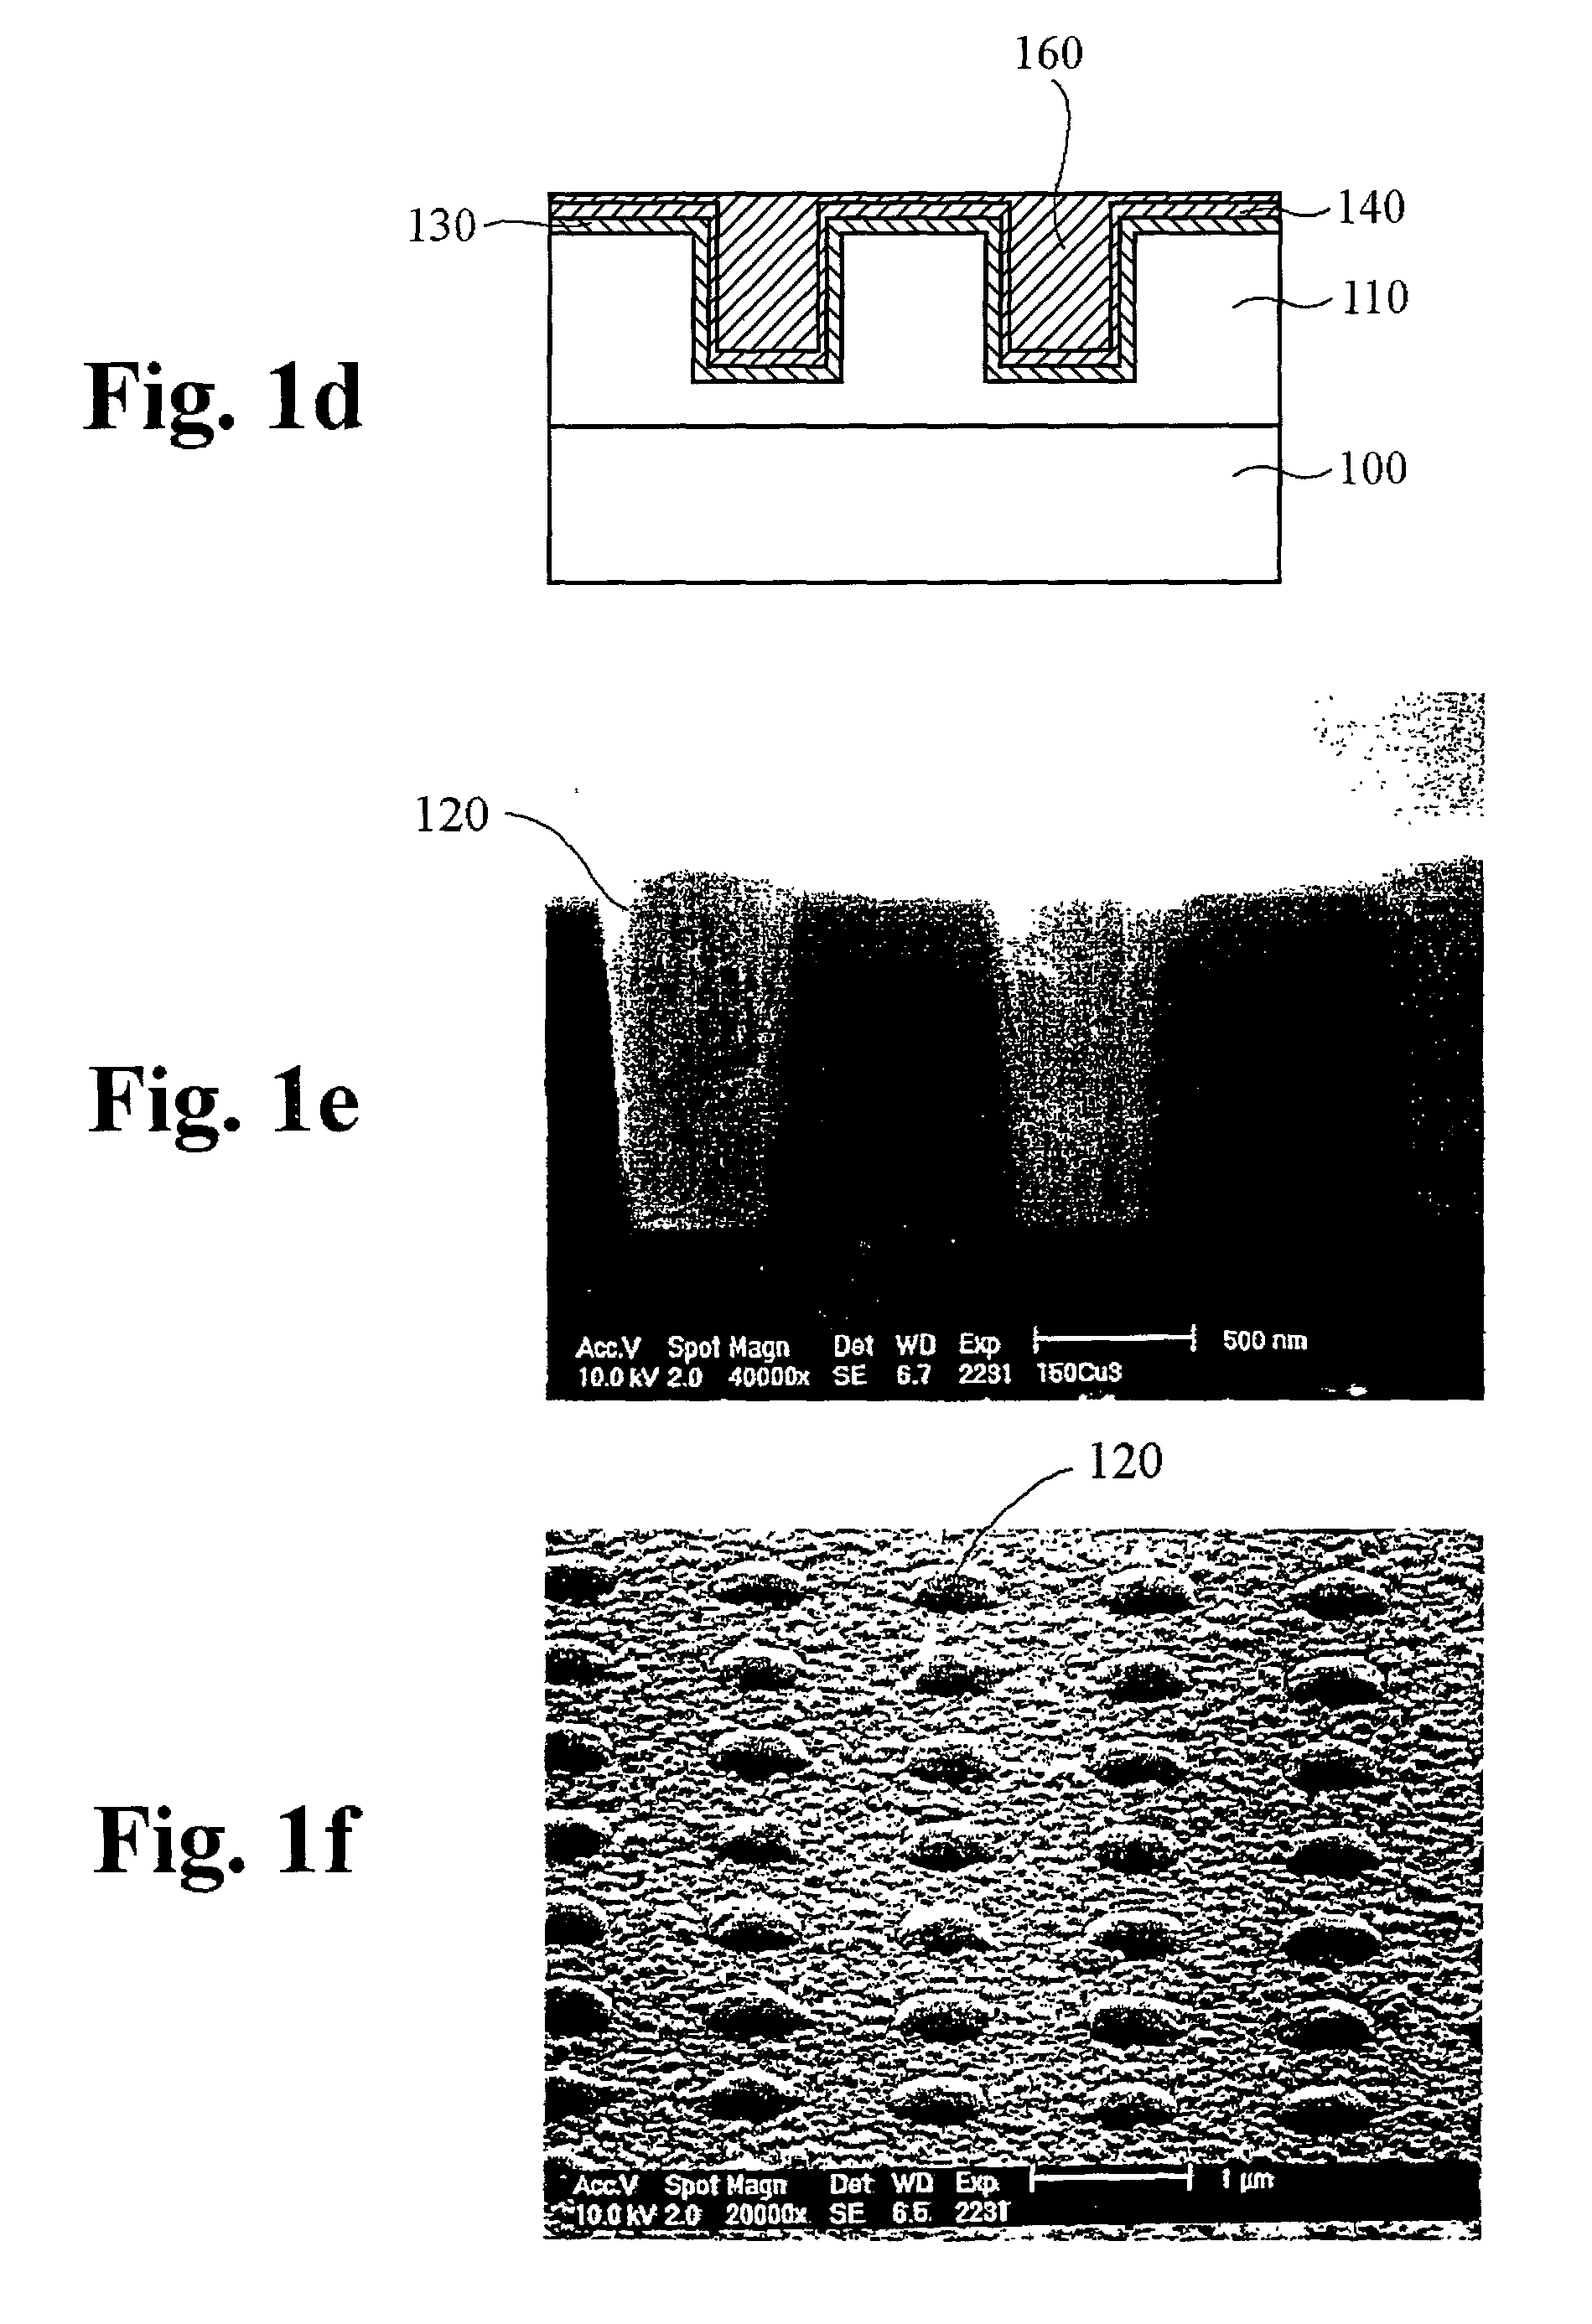 Method of forming copper interconnections and thin films using chemical vapor deposition with catalyst